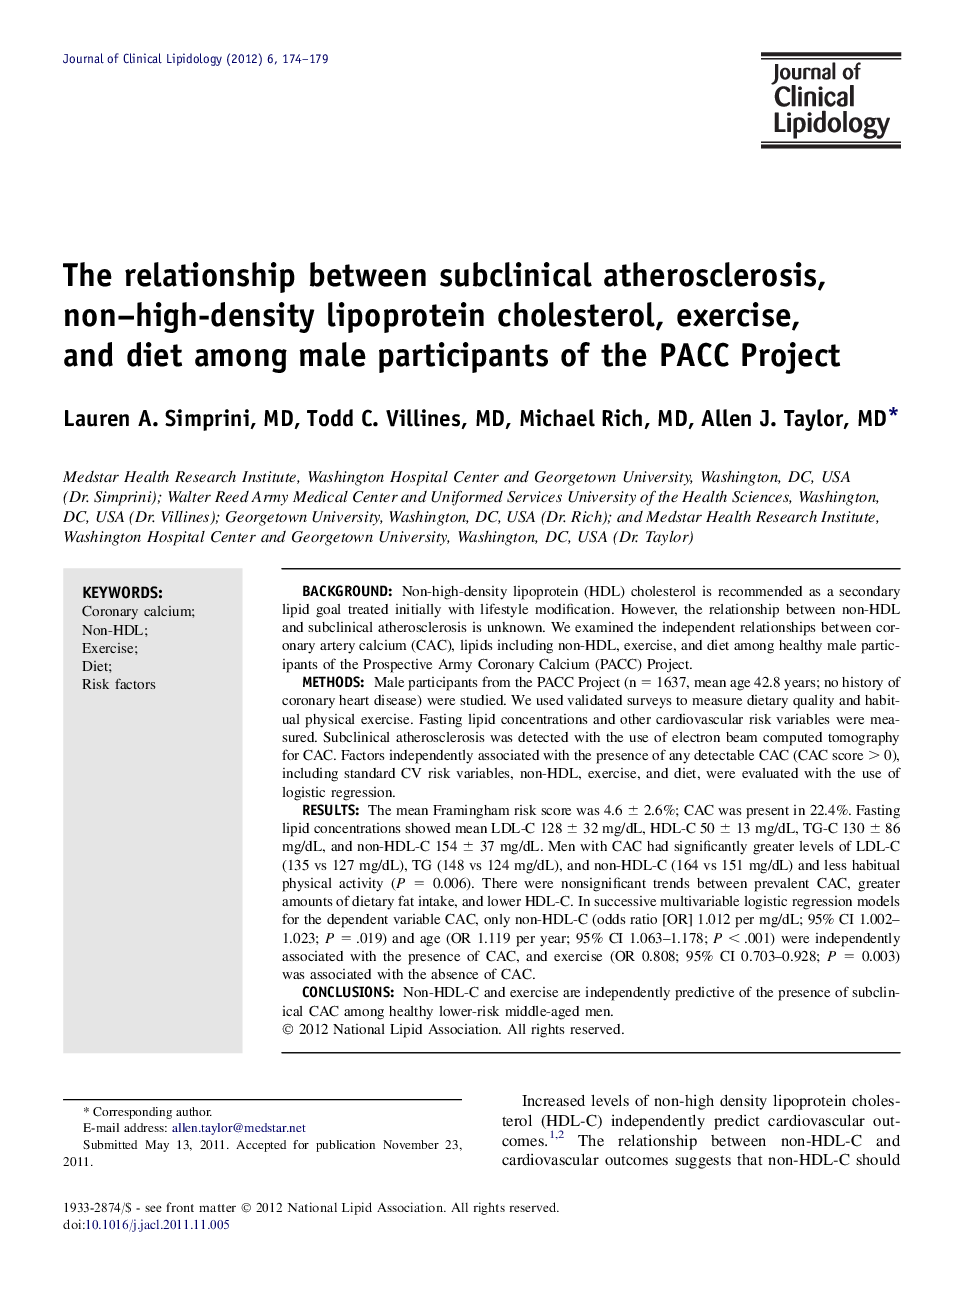 The relationship between subclinical atherosclerosis, non–high-density lipoprotein cholesterol, exercise, and diet among male participants of the PACC Project